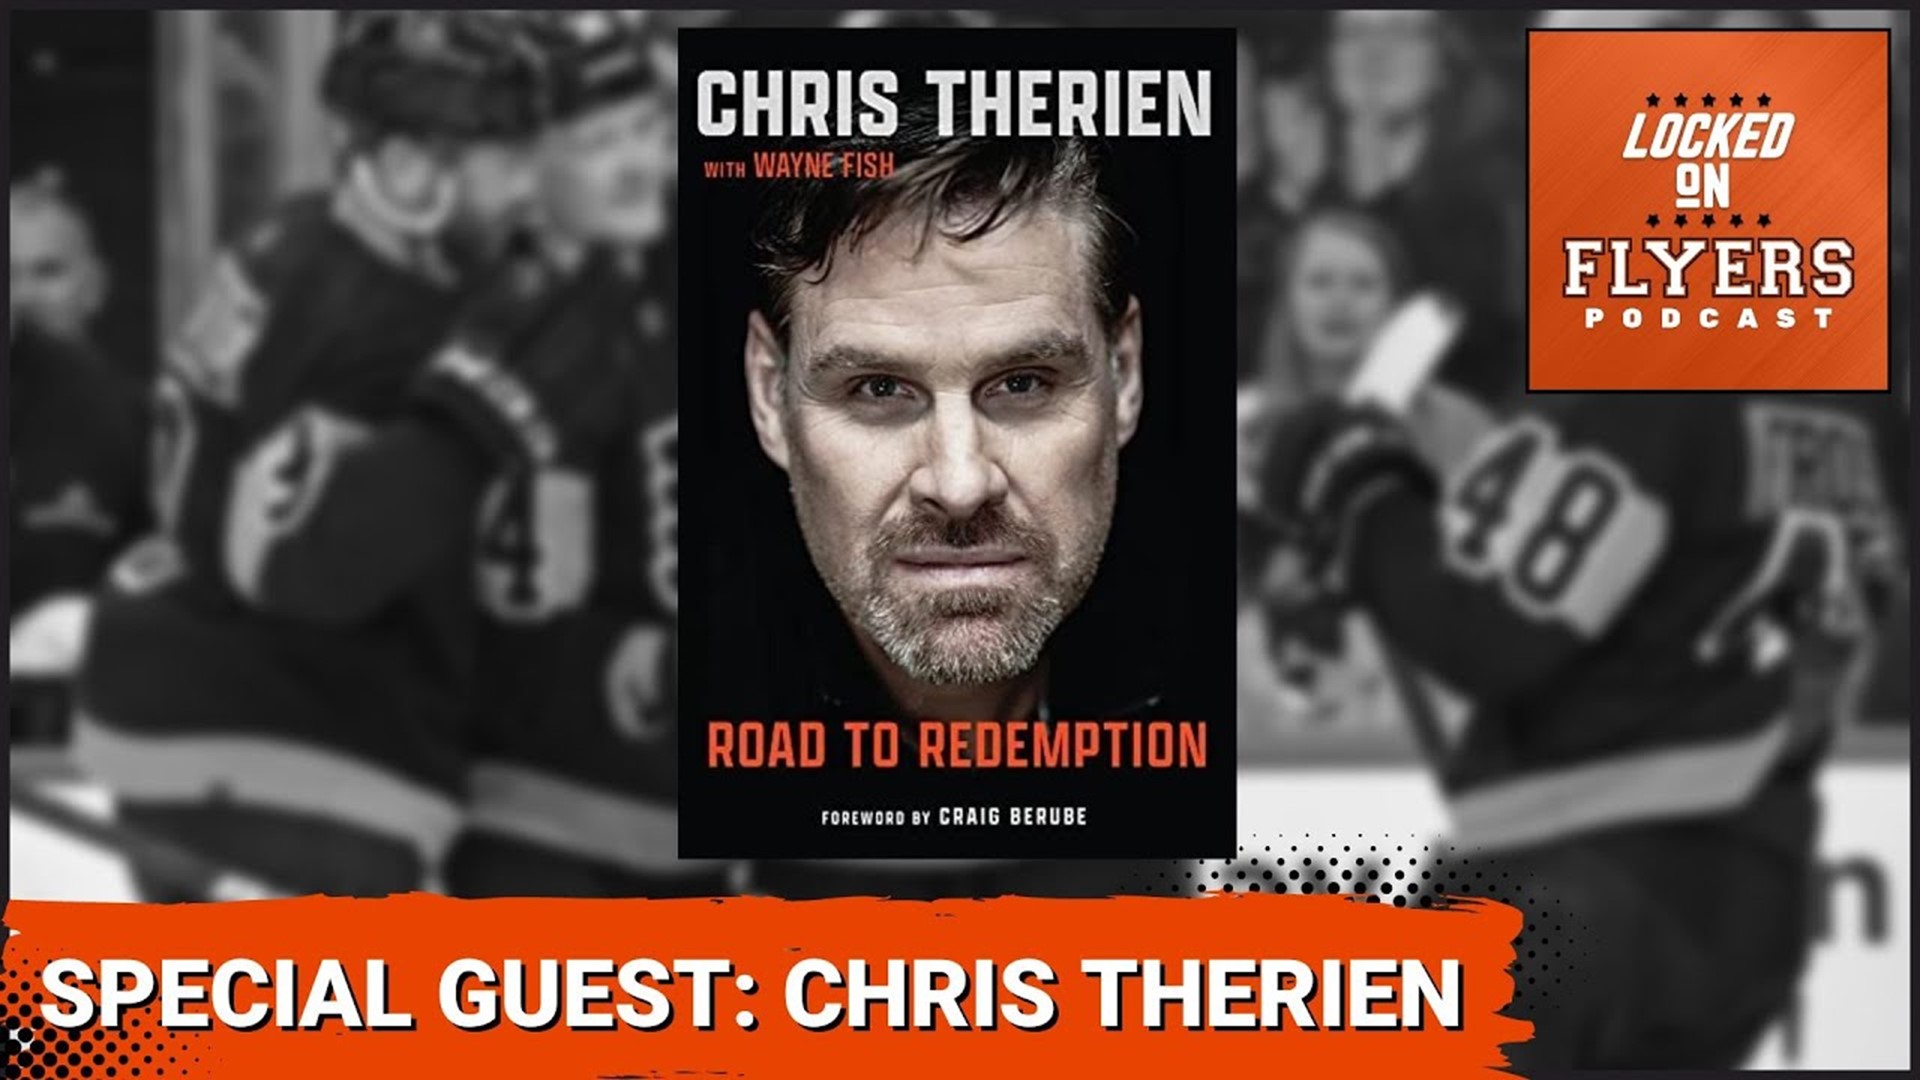 Russ and Rachel give quick thoughts on last night’s game vs the Columbus Blue Jackets. Then we sit down with Chris Therien to discuss his new book Road to Redemption